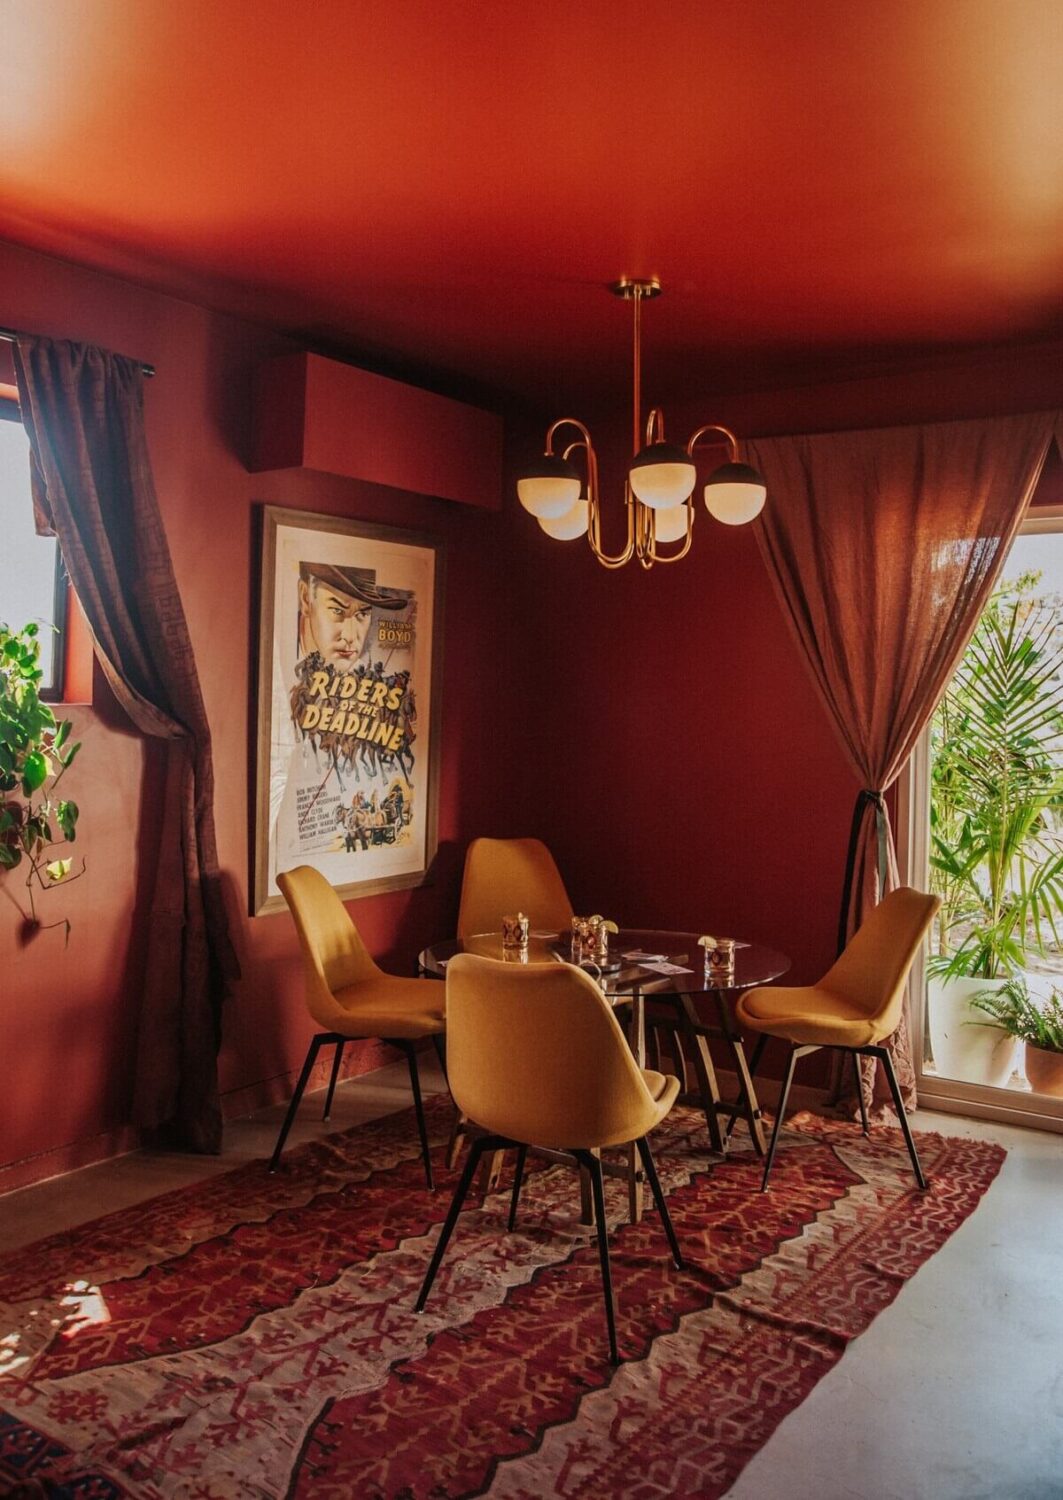 deep-red-living-room-rug-airbnb-morongo-valley-nordroom